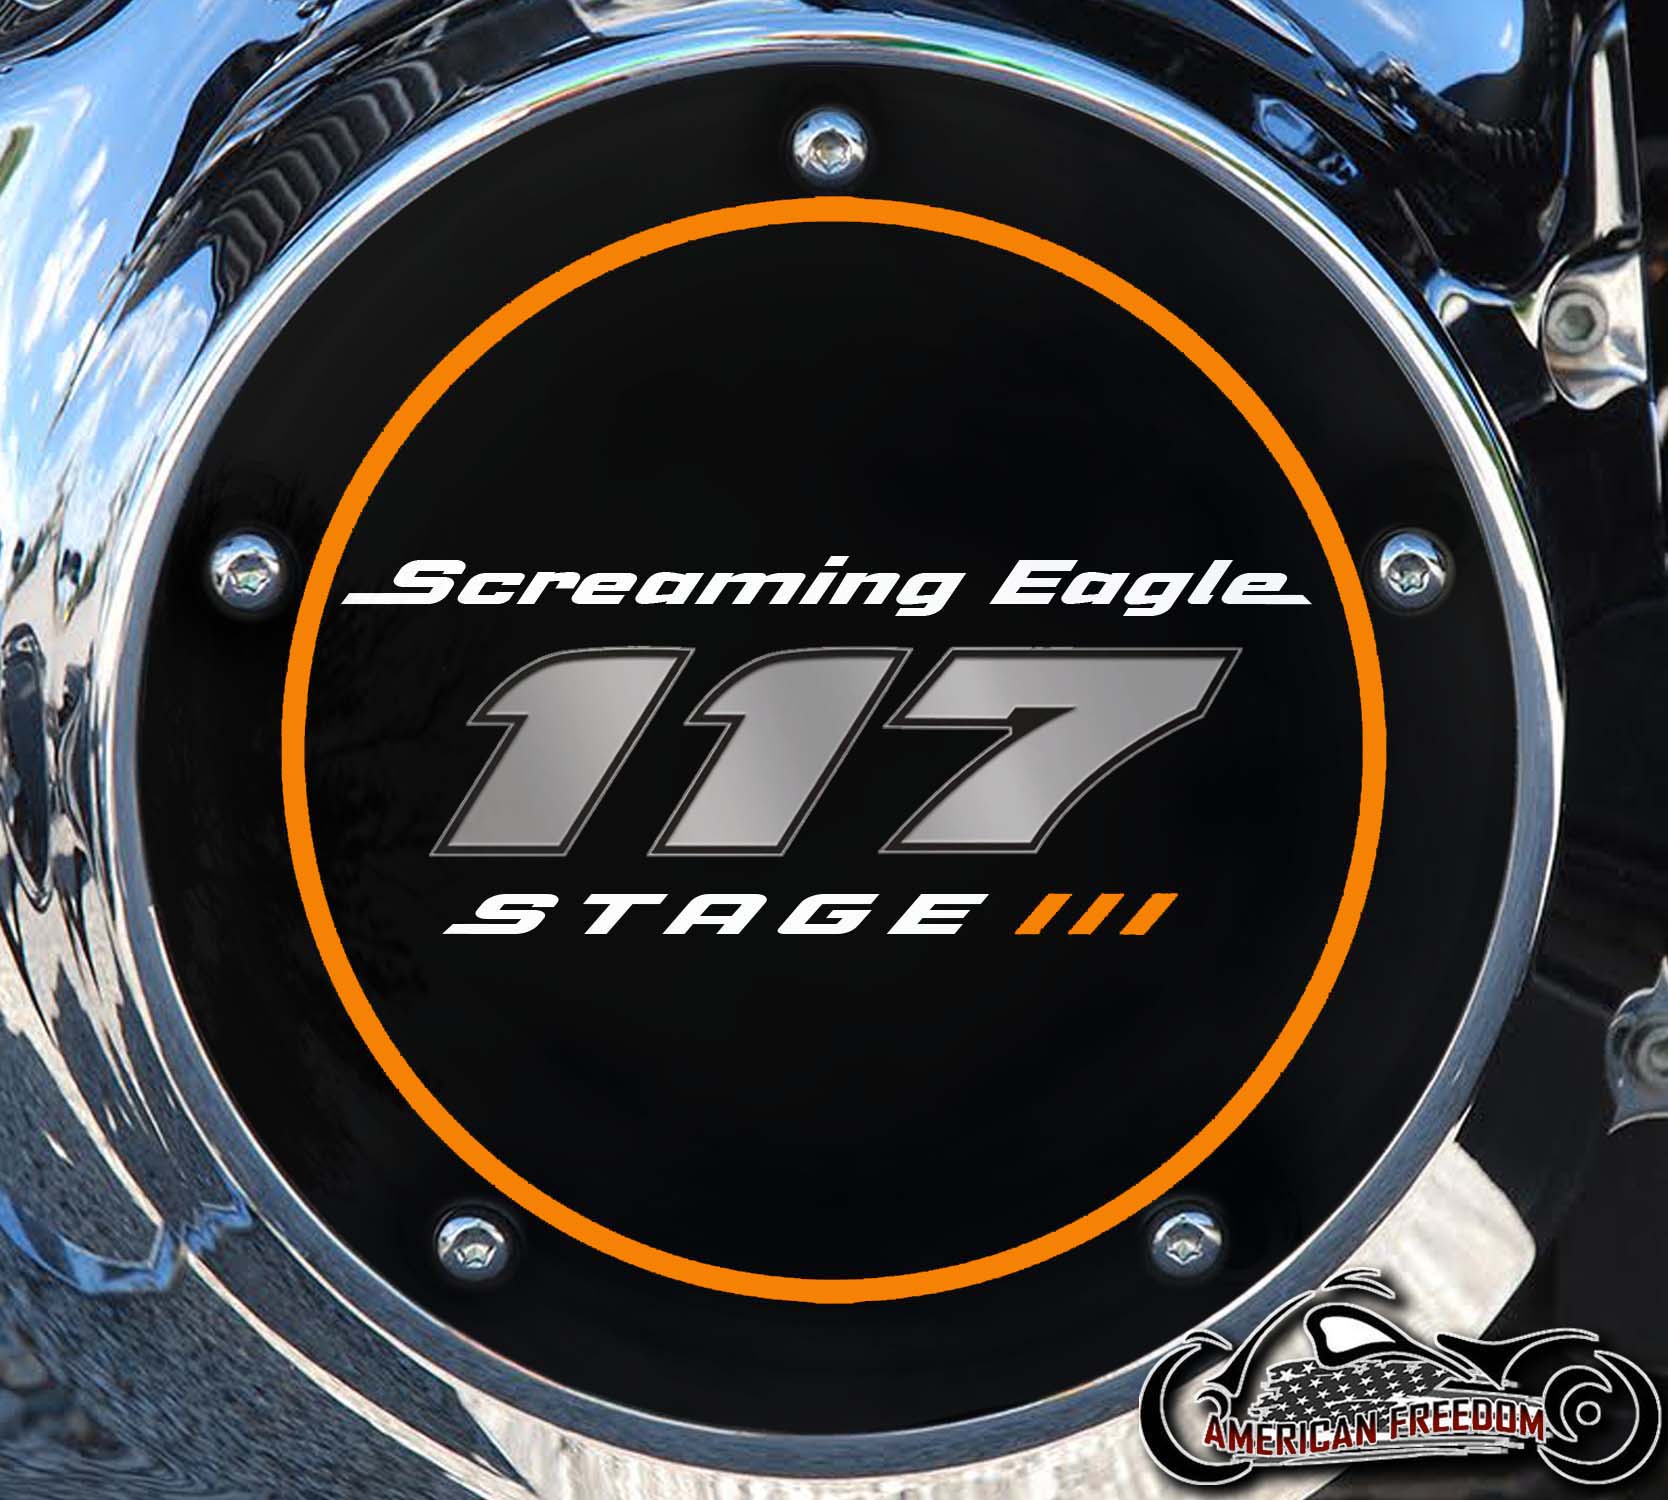 Screaming Eagle Stage III 117 Derby Cover orange ring